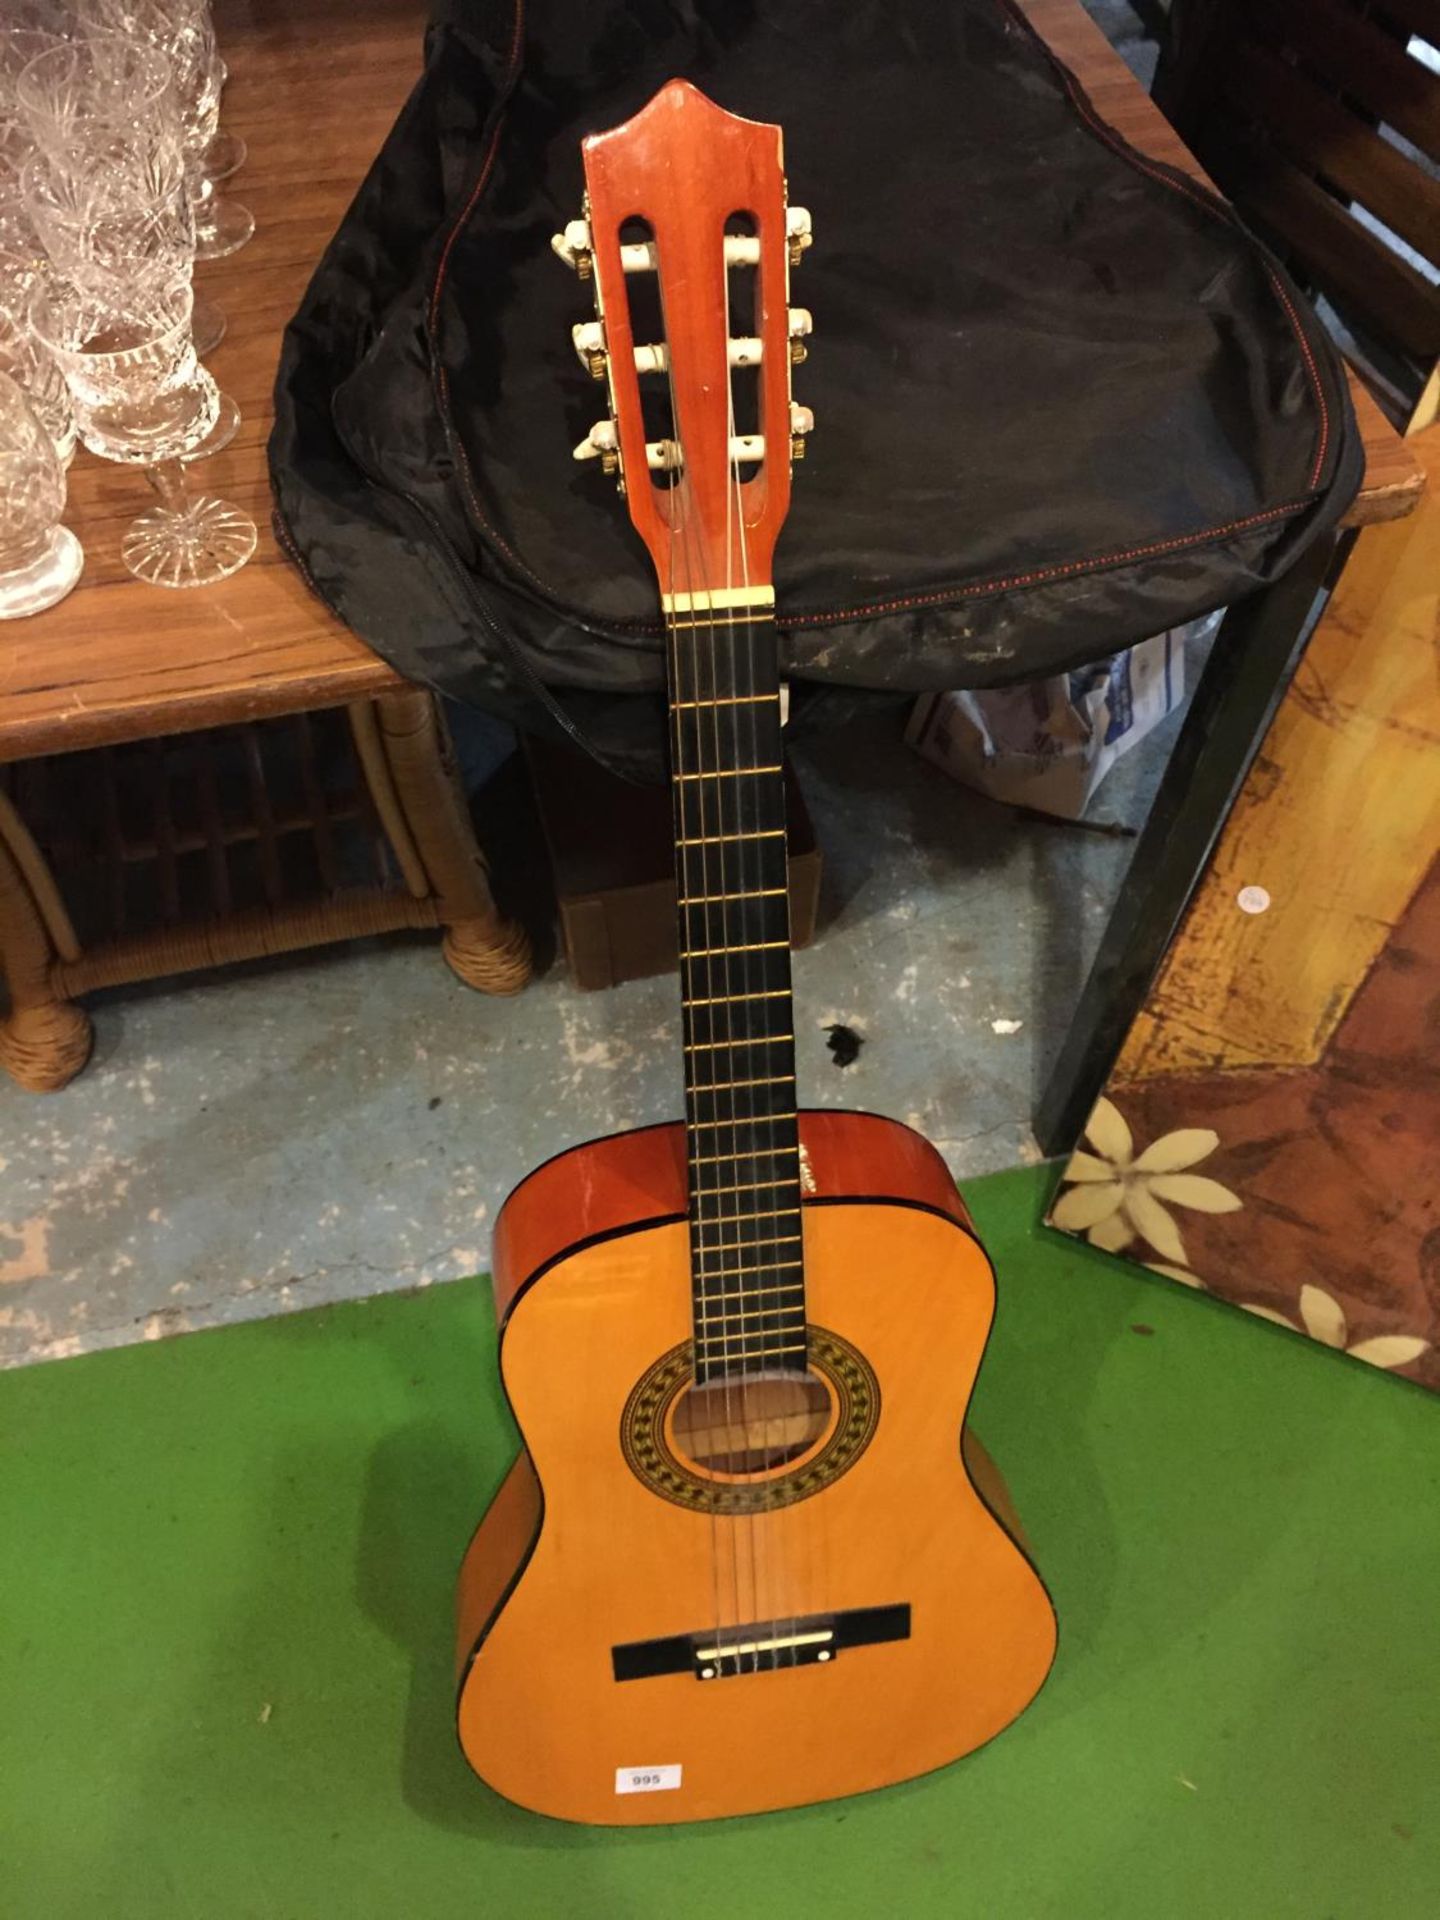 A 'HERALD' ACCOUSTIC GUITAR AND CASE